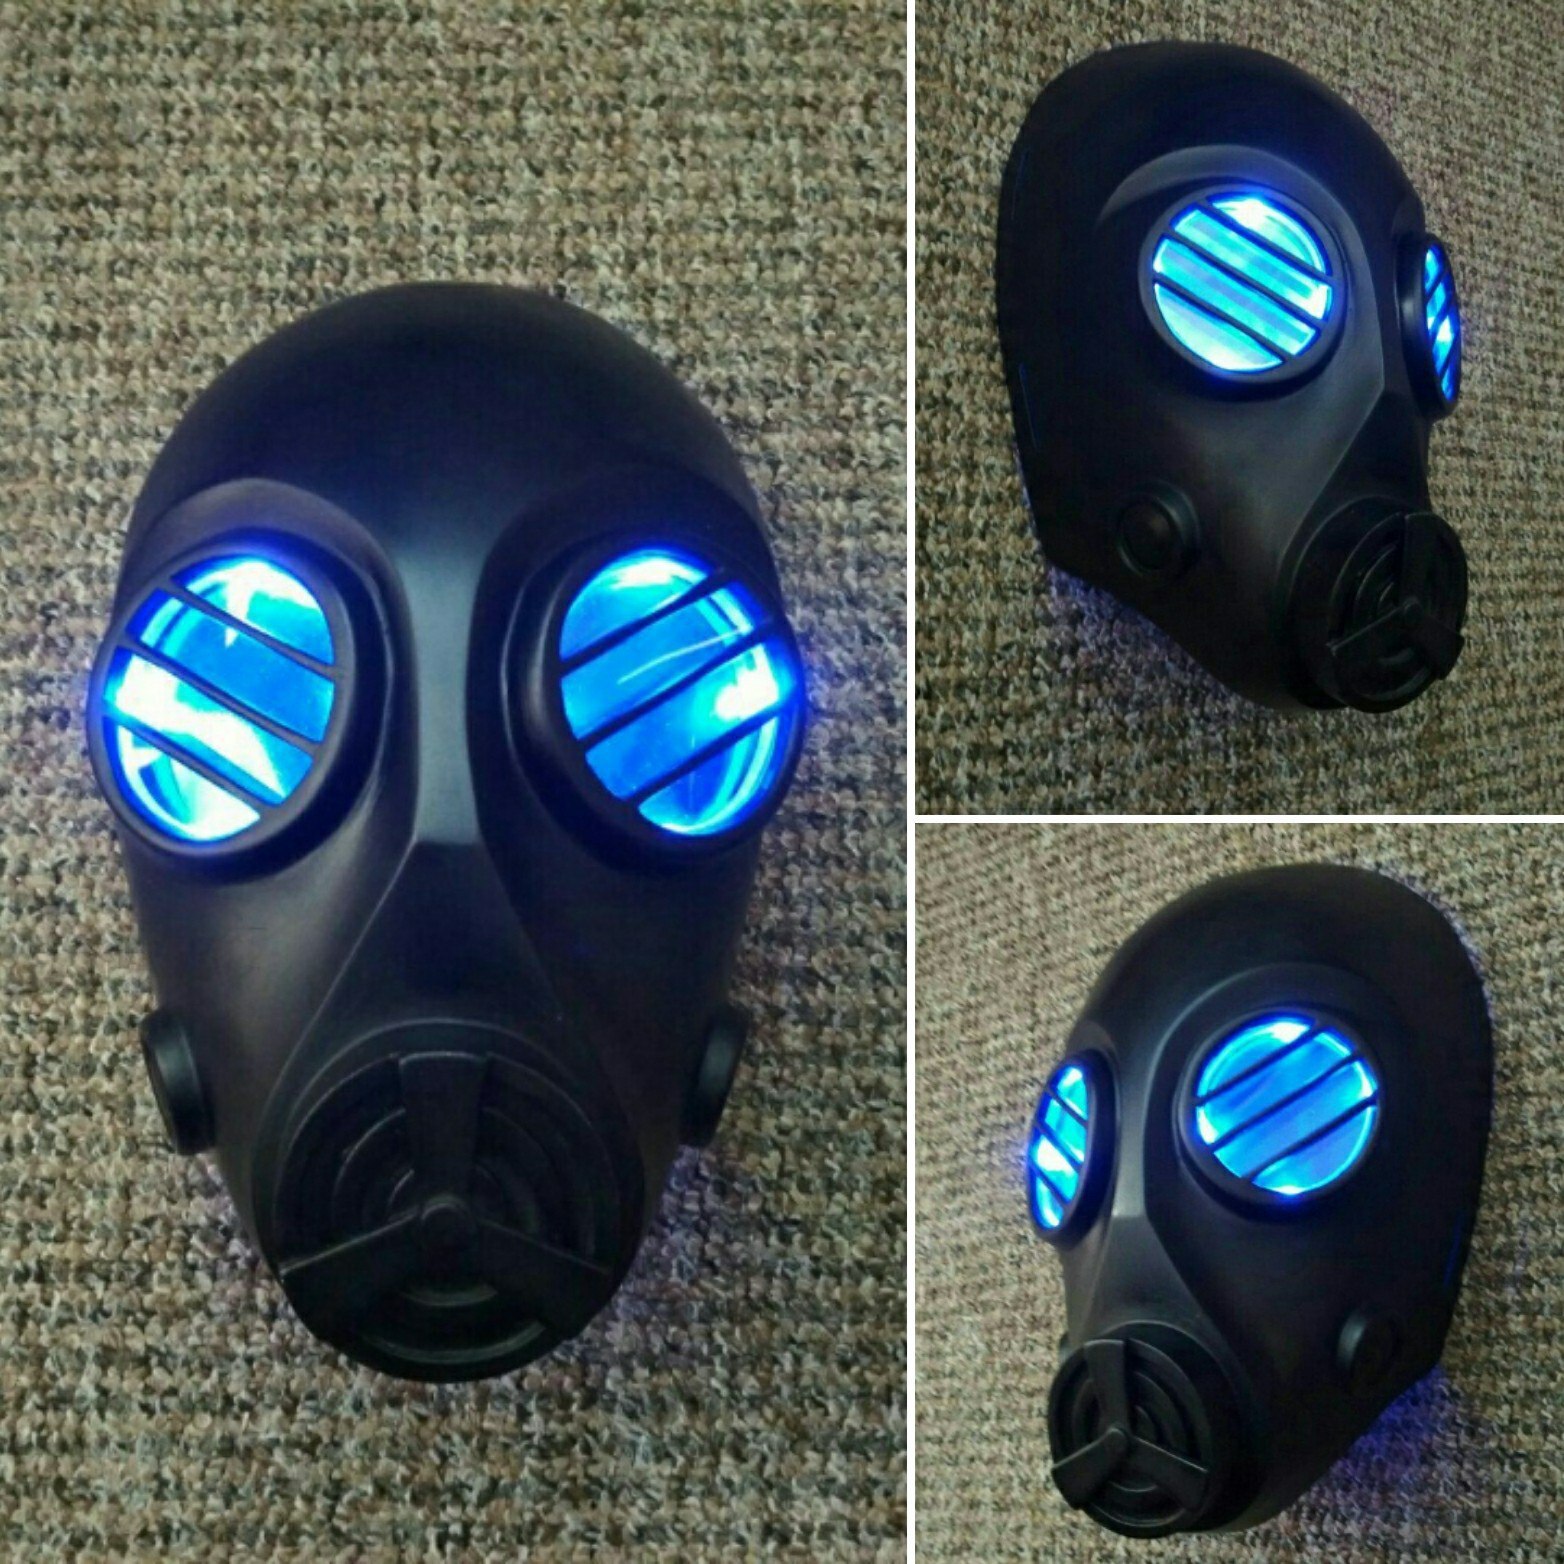 Vector's mask from the Resident Evil universe - pikabu.monster